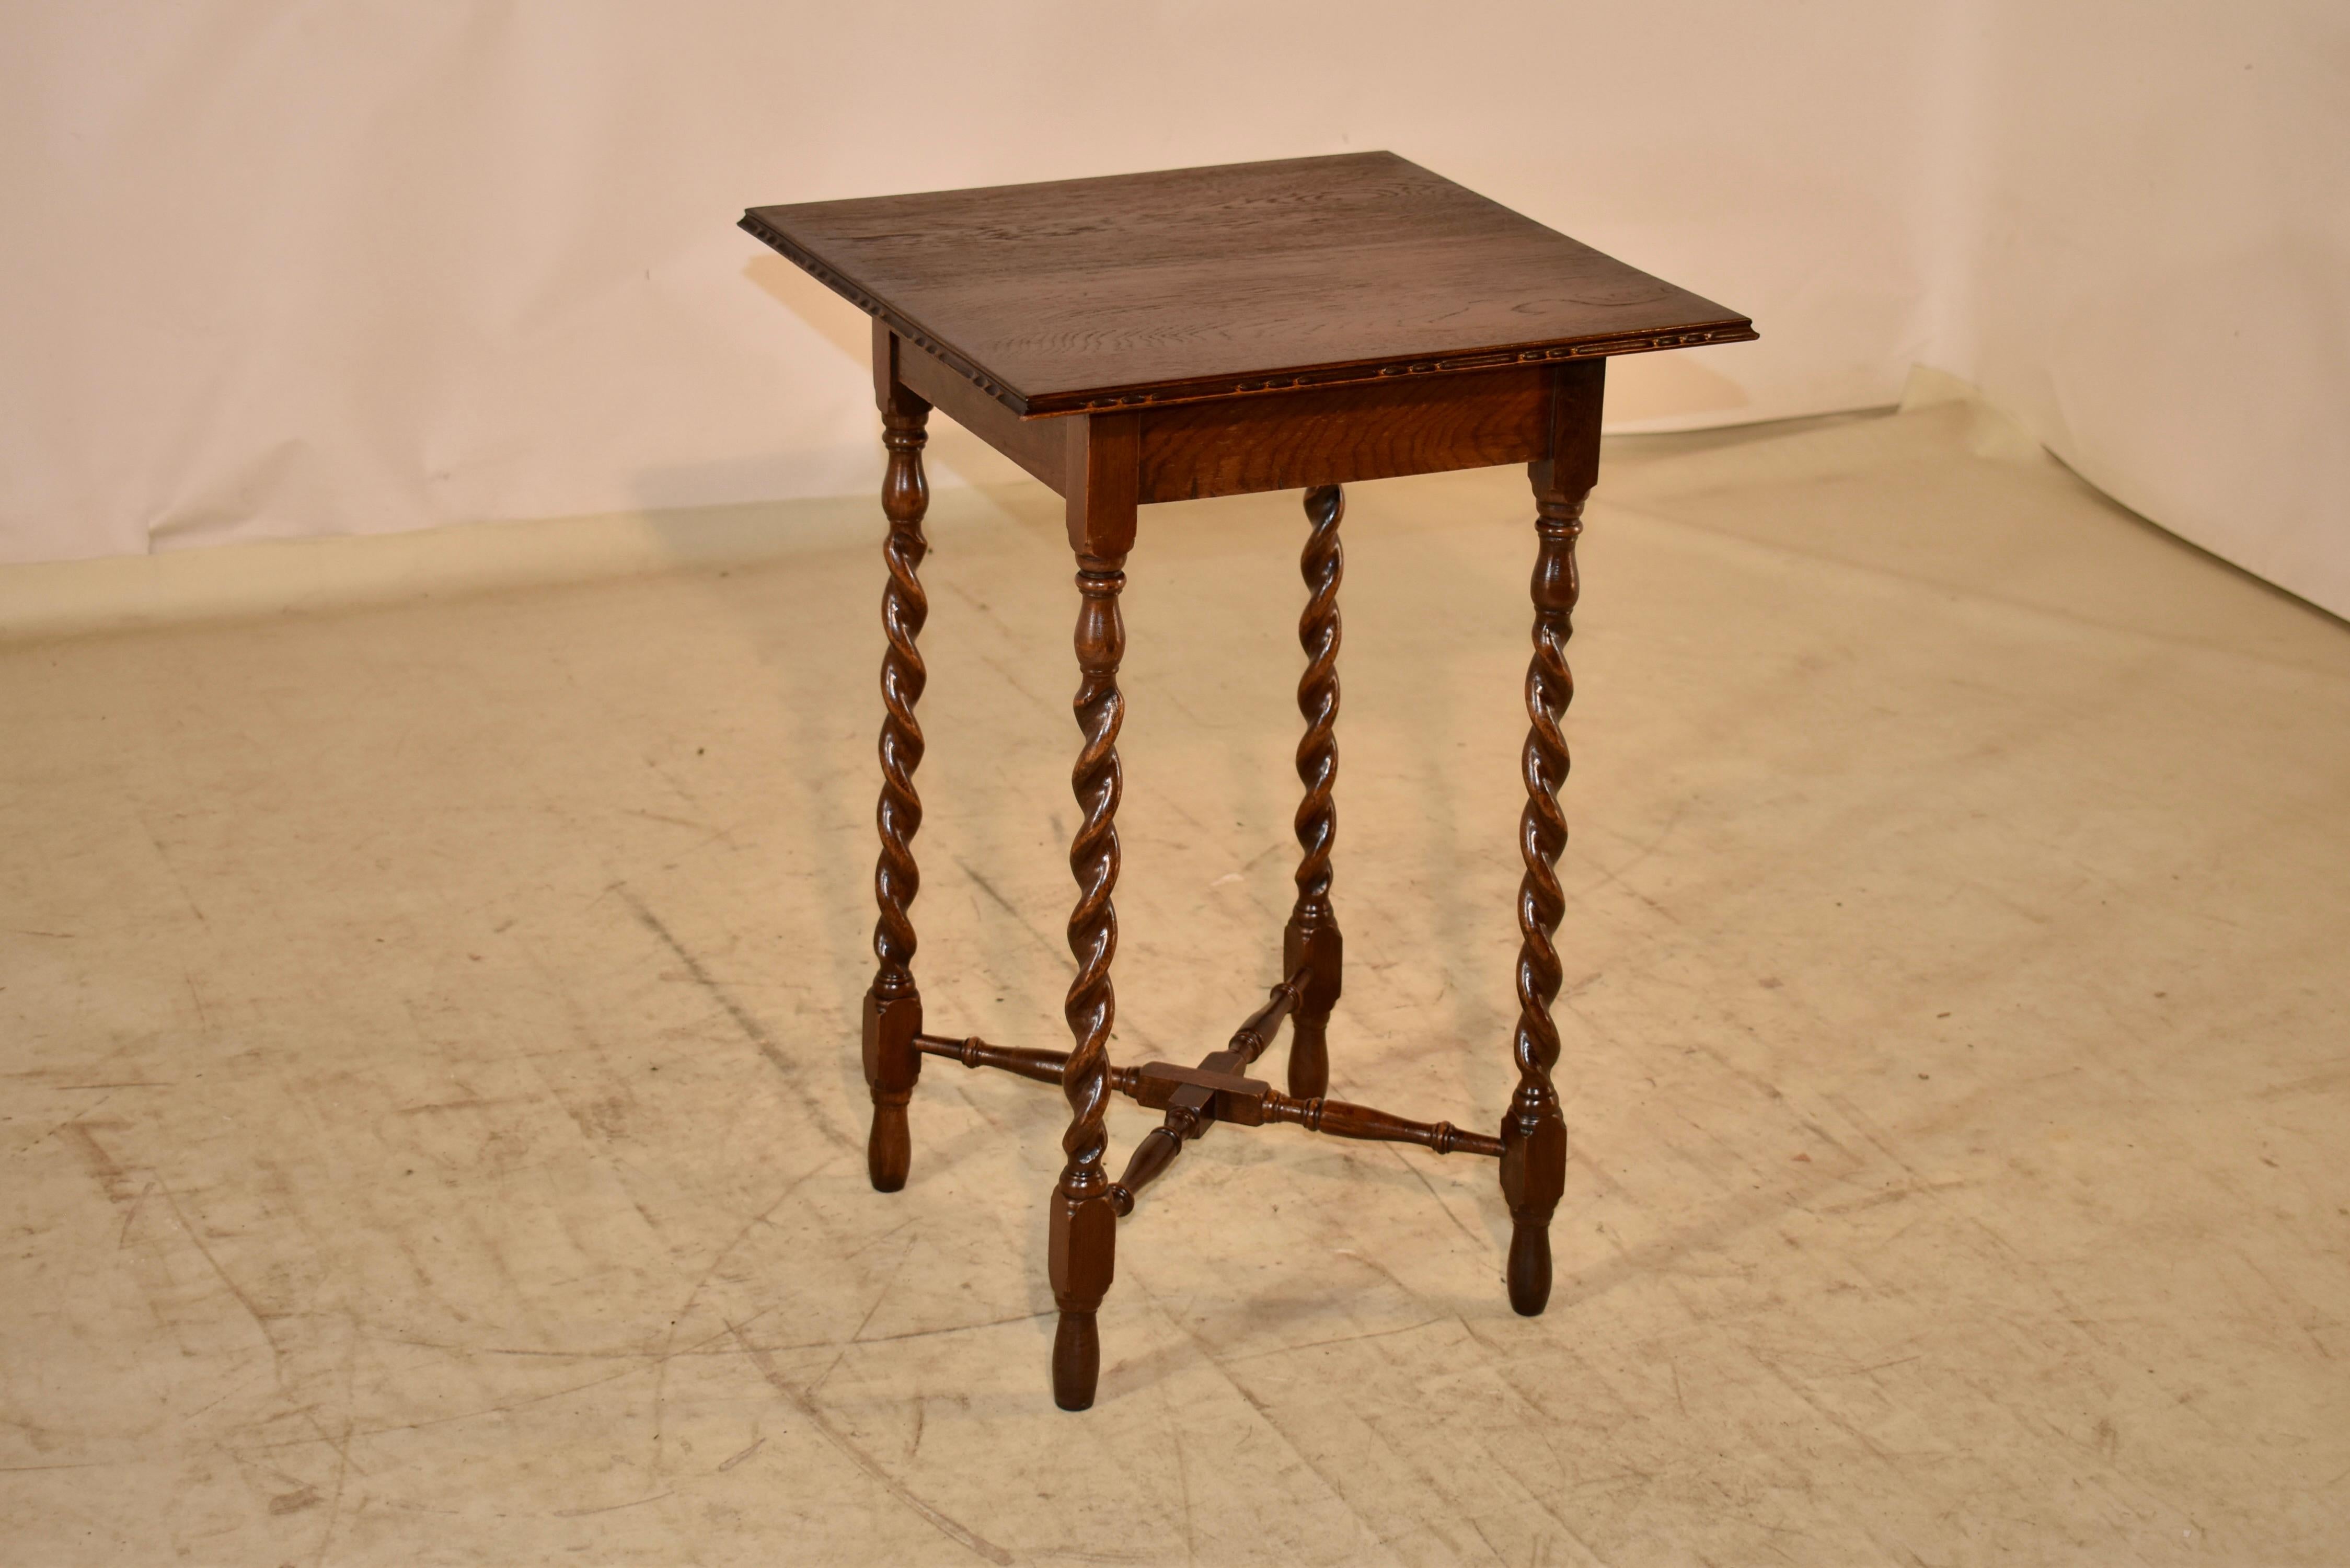 circa 1900 Edwardian oak side table from England. The top has a beveled and carved decorated edge, following down to a simple apron. The table is supported on hand turned barley twist legs, joined by hand turned cross stretchers and raised on hand